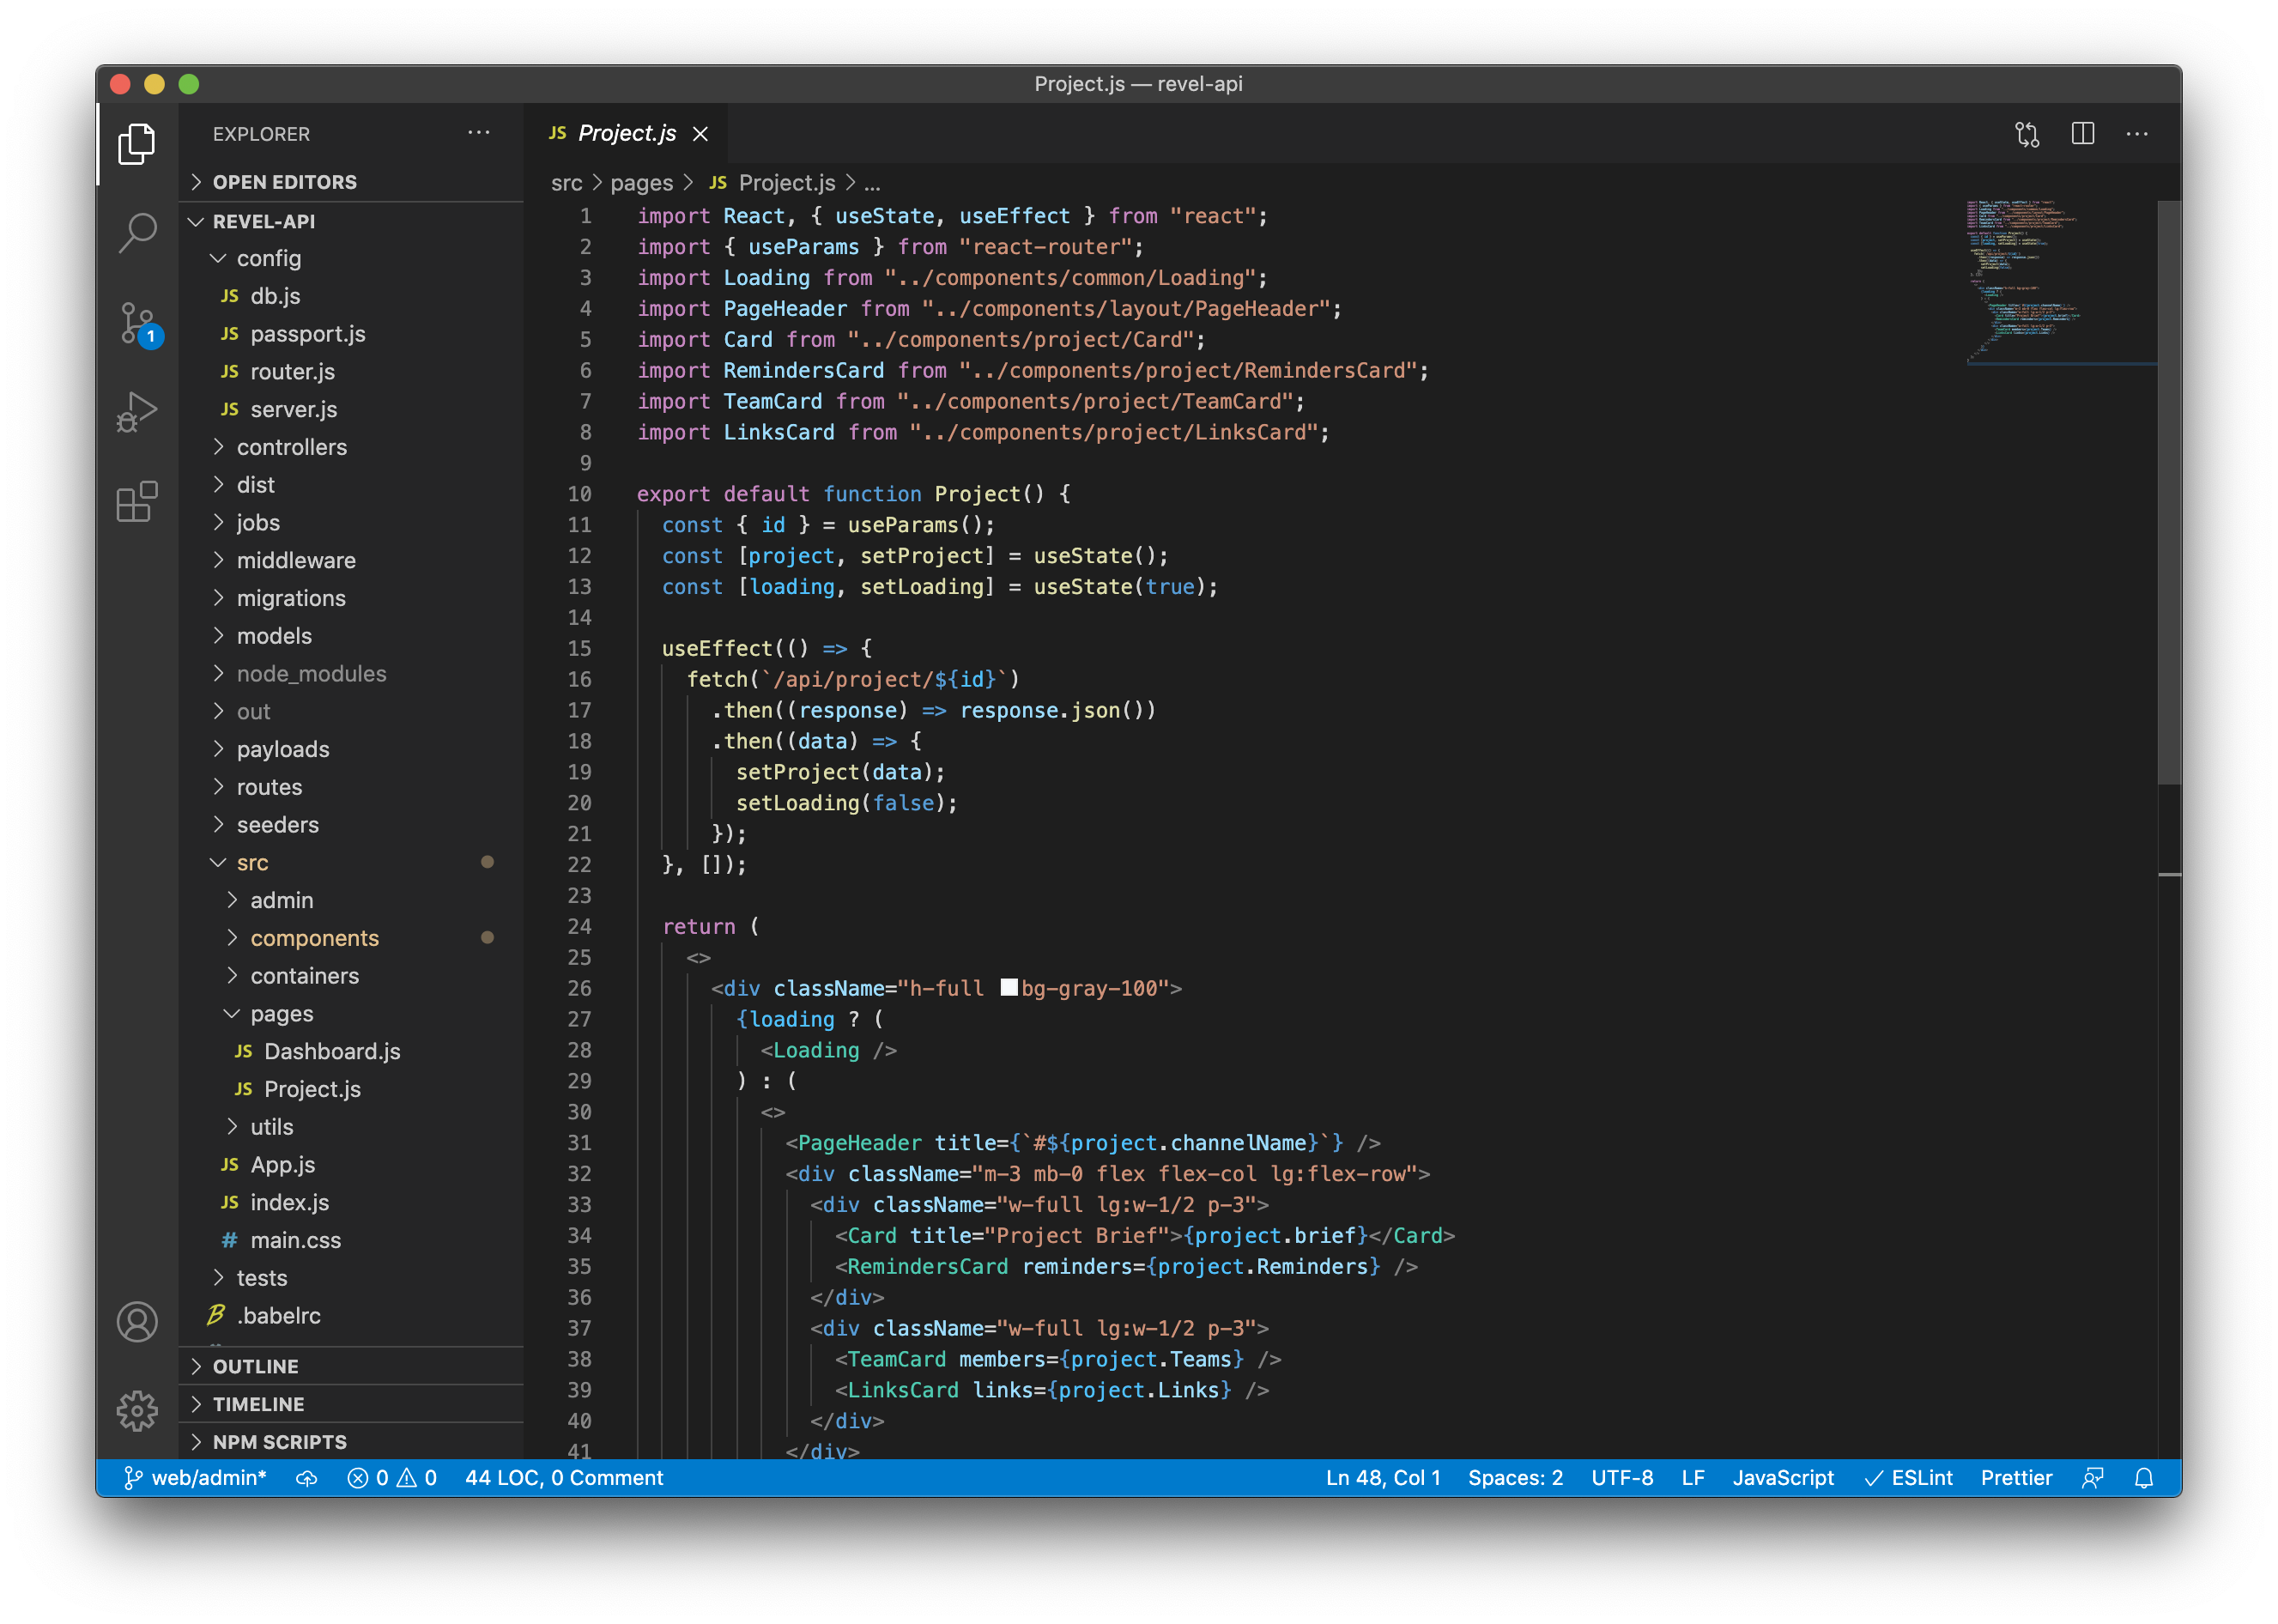 Dark mode UI design is the default for many code editors